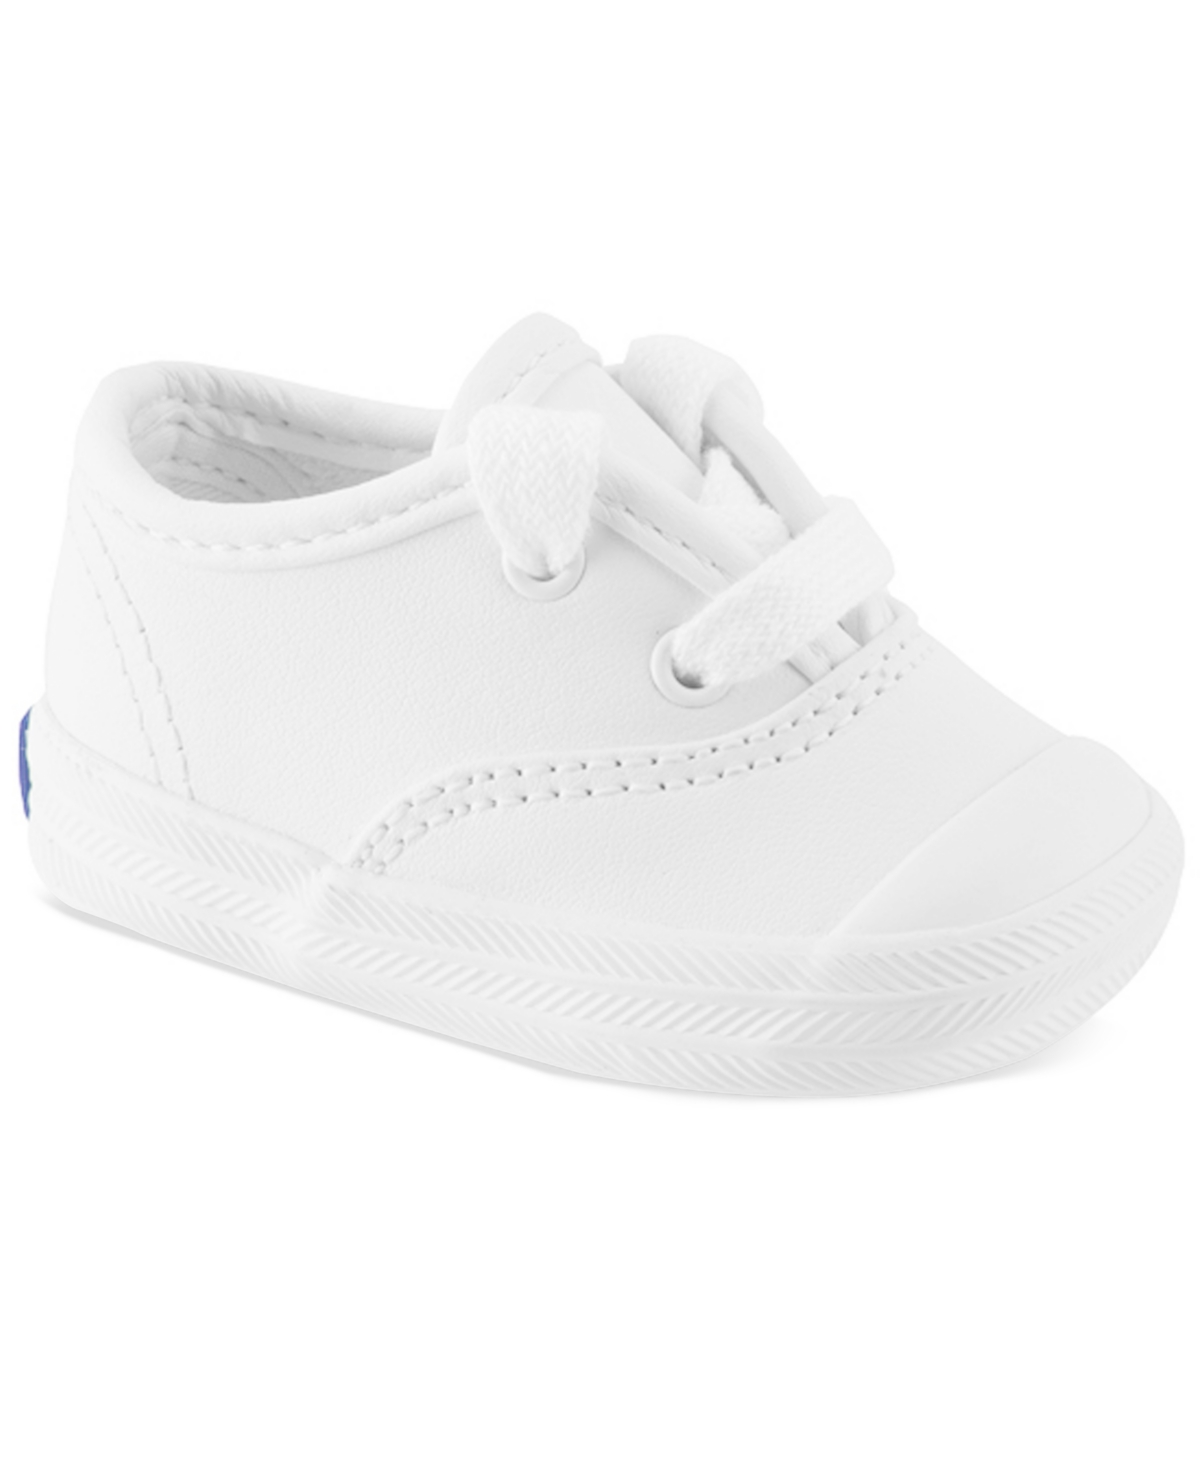 UPC 044213619772 product image for Keds Champion Sneakers, Baby Girls | upcitemdb.com